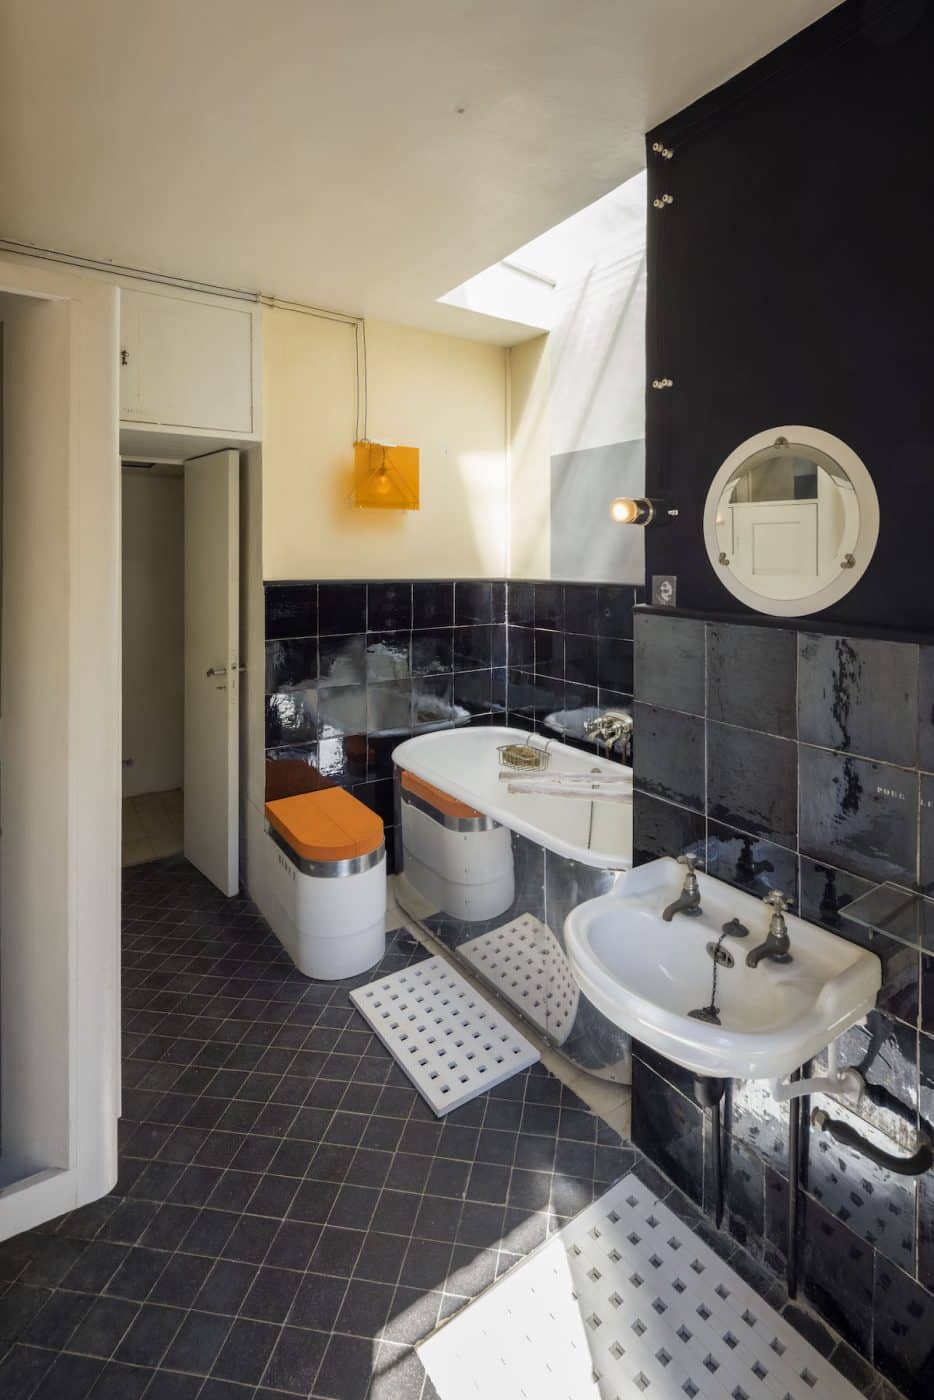 The bathroom of E-1027, designed by Eileen Gray